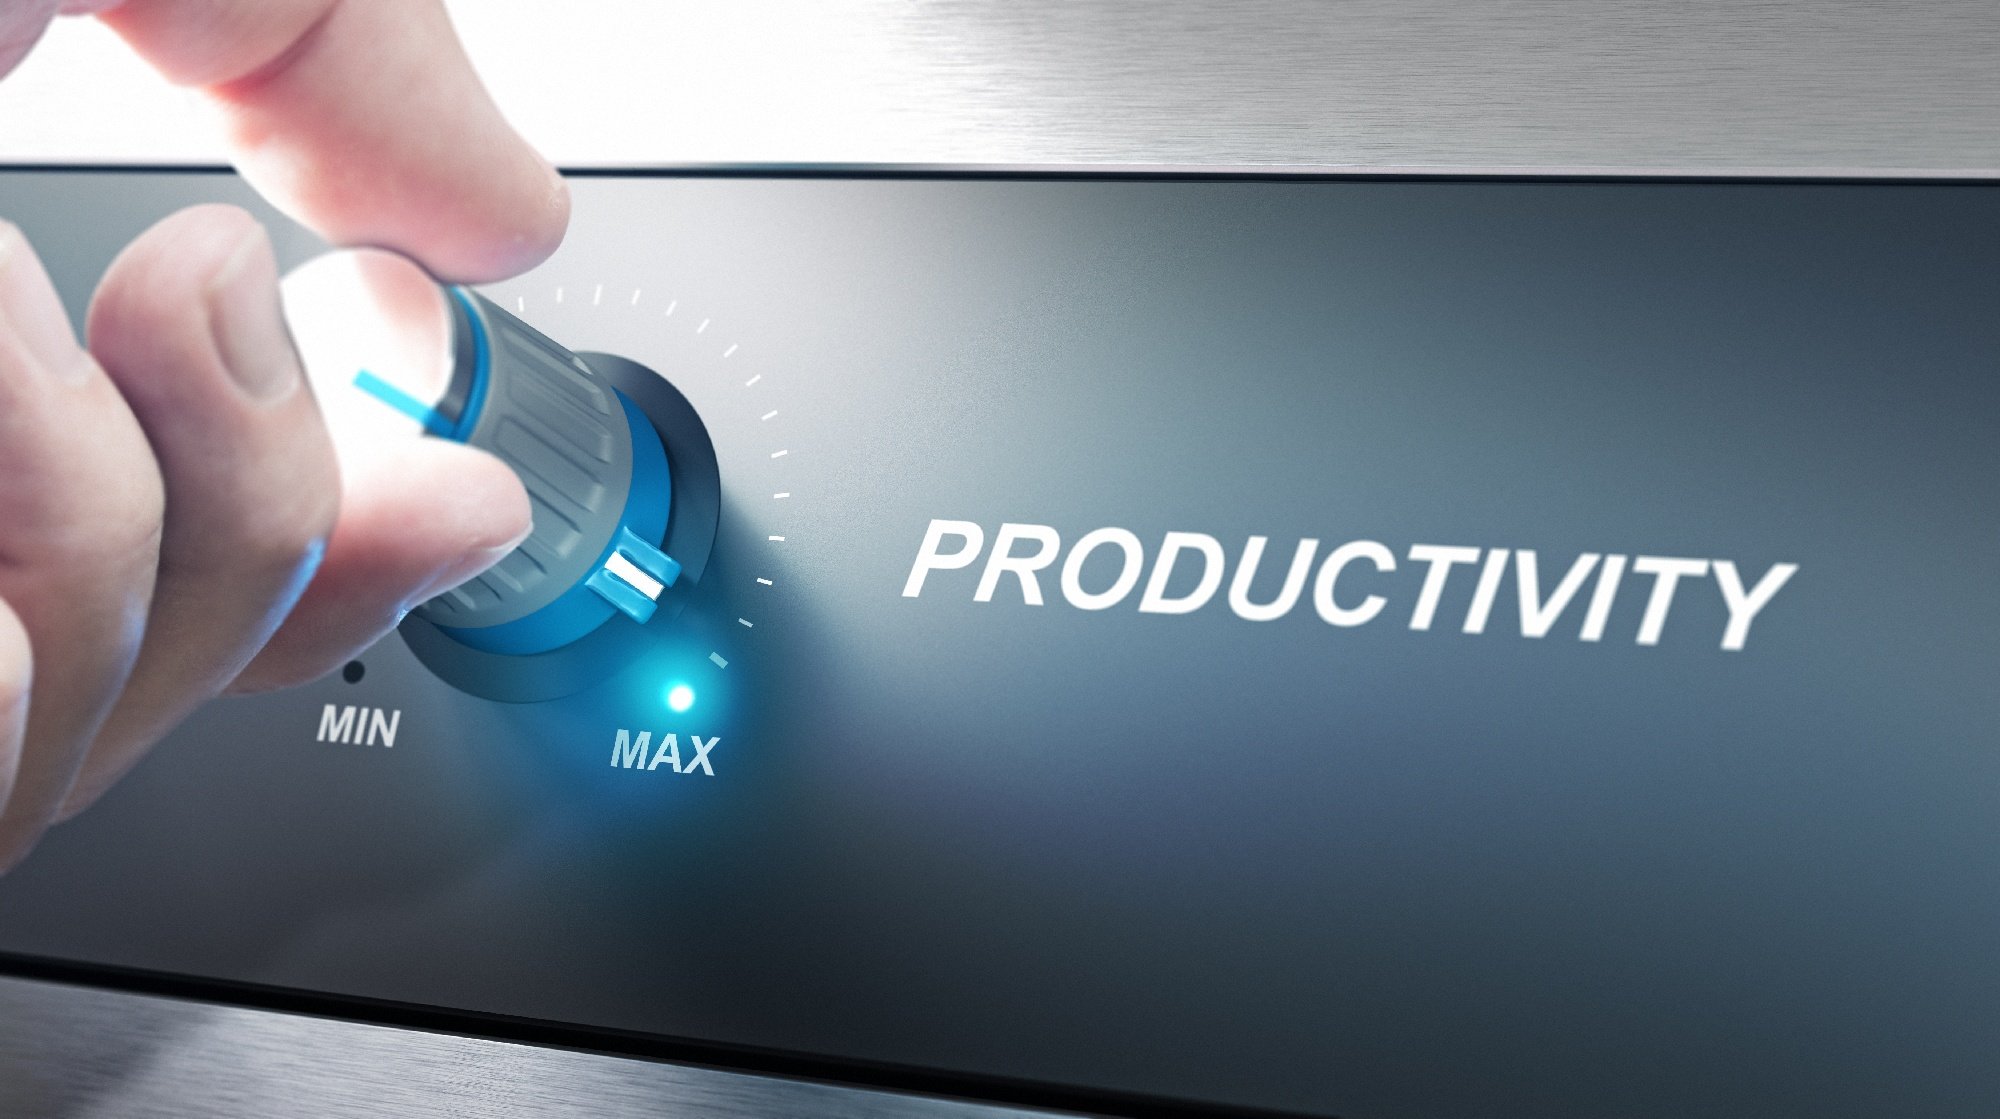 Image of person turning knob to max productivity